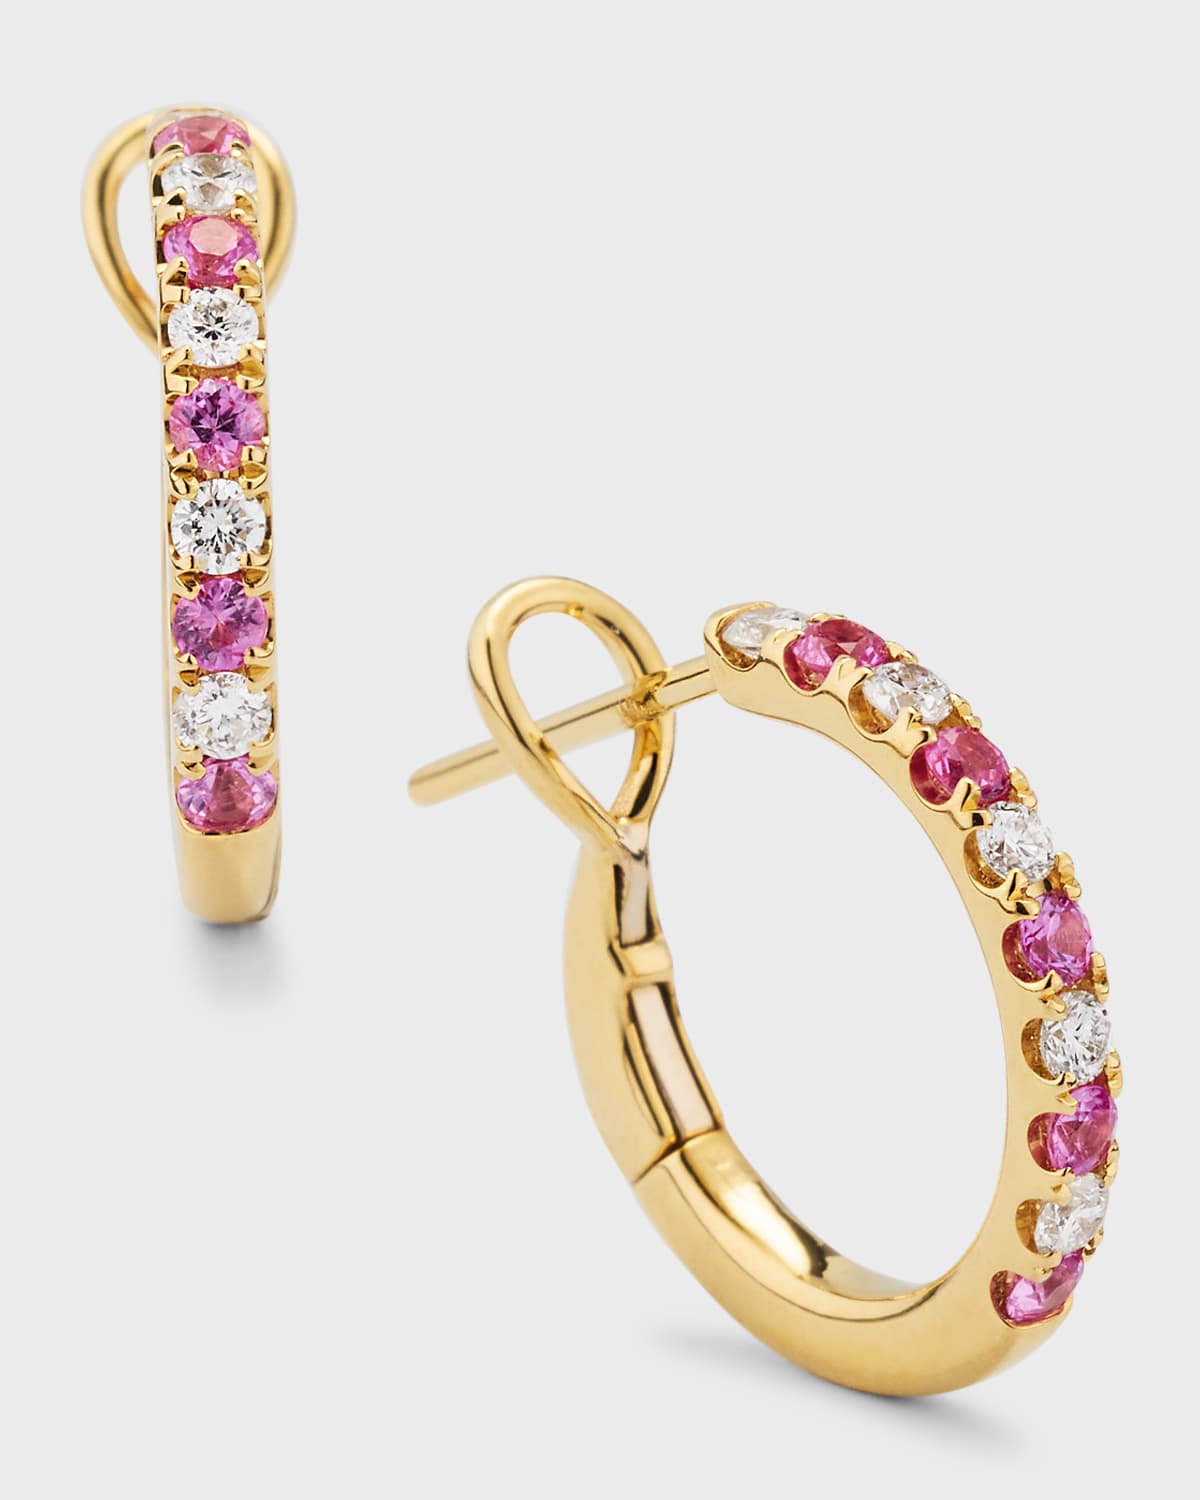 18K Yellow Gold Small Alternating Diamond and Pink Sapphire Hoop Earrings